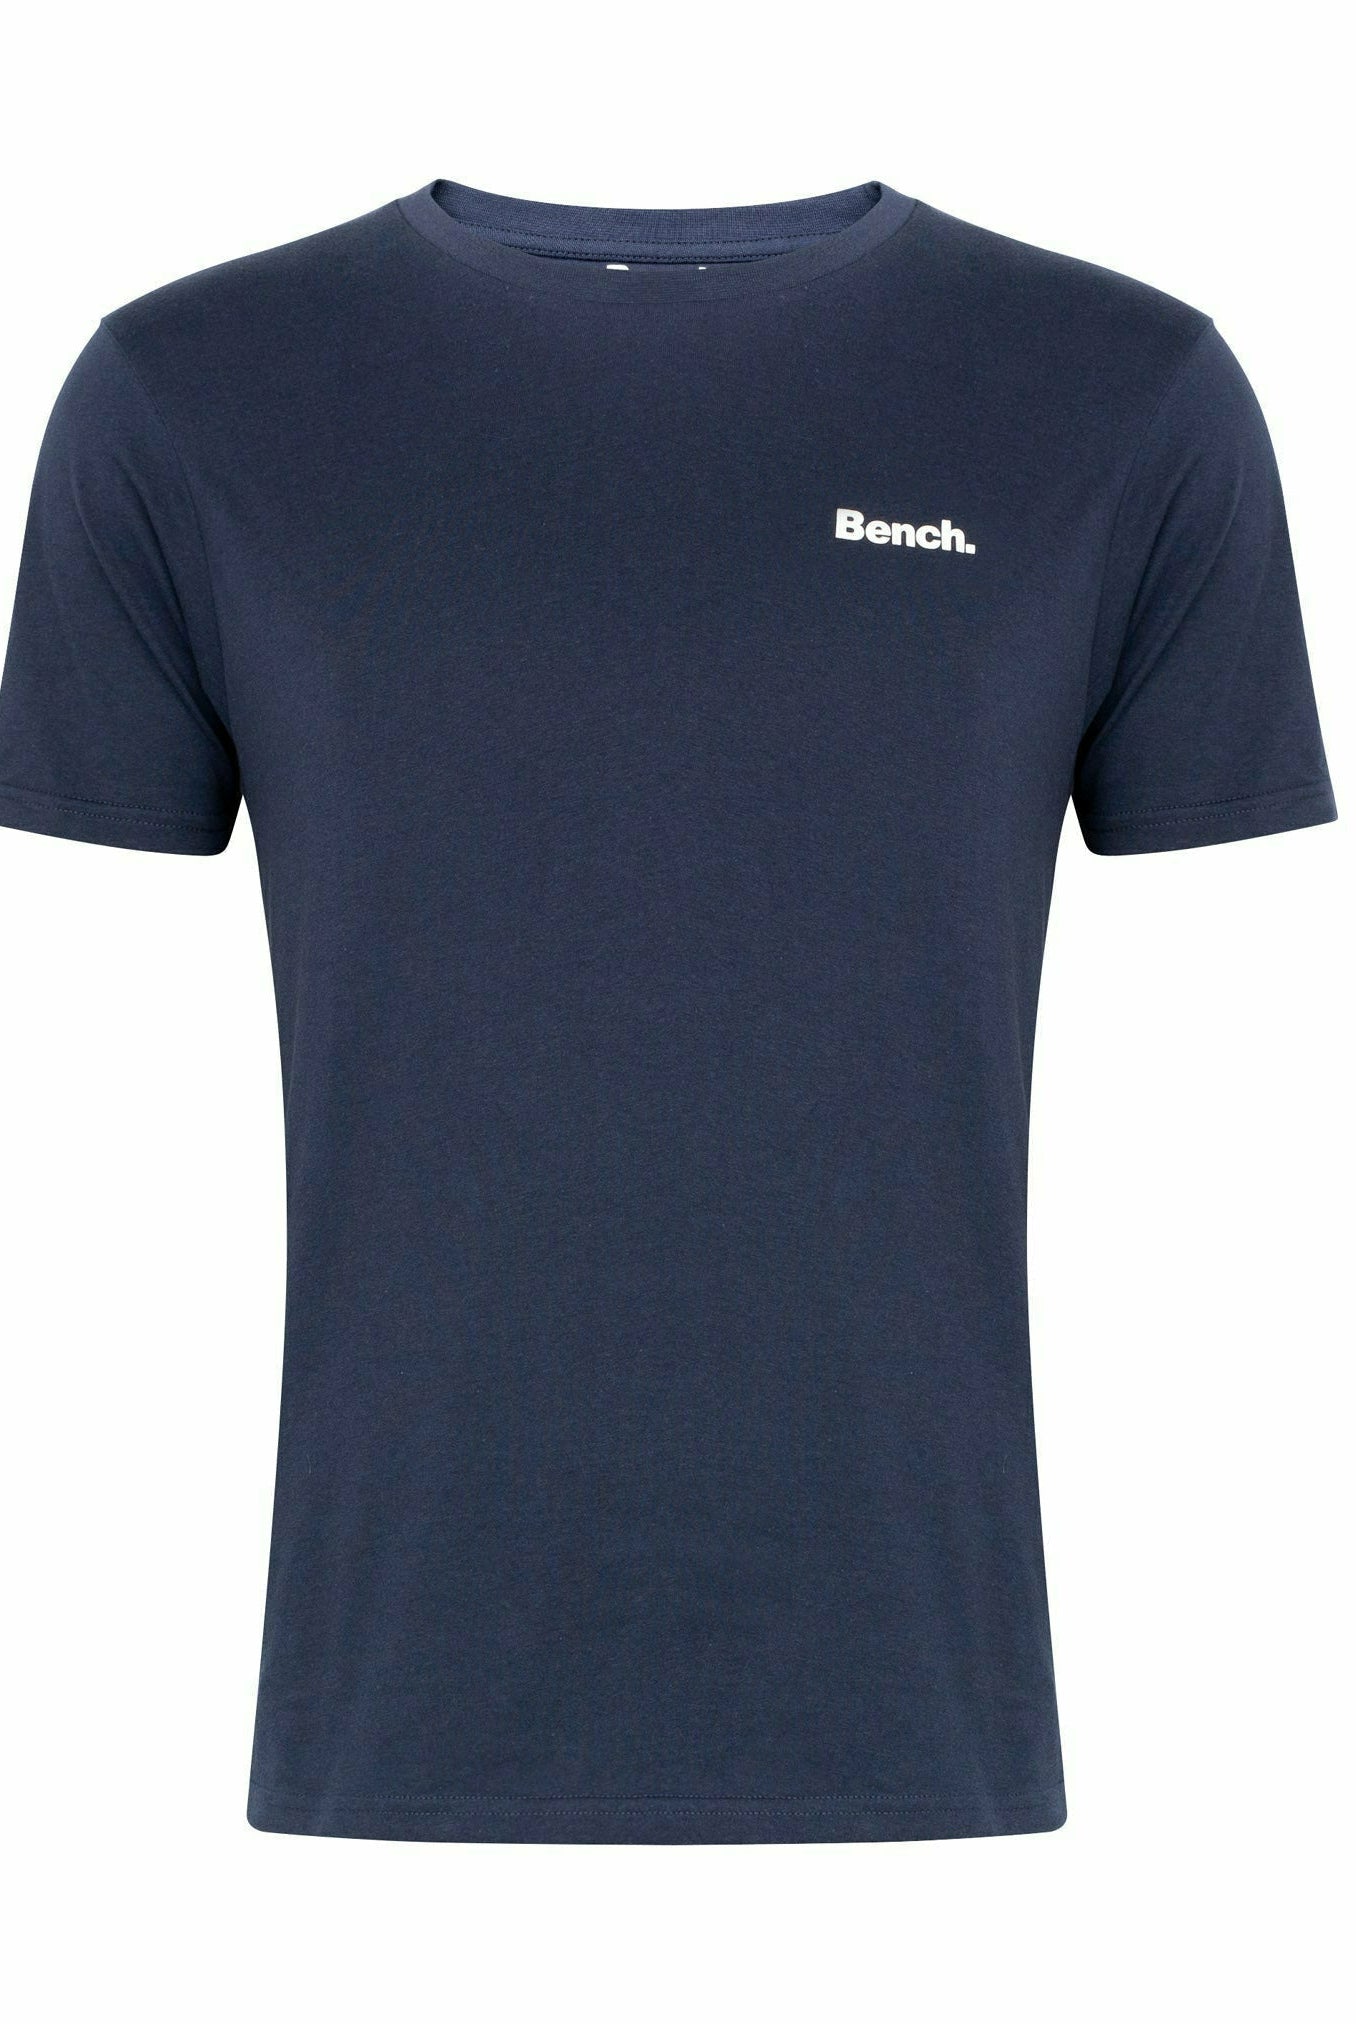 Mens 'JOSH' 5 Pack T-Shirts - ASSORTED - Shop at www.Bench.co.uk #LoveMyHood